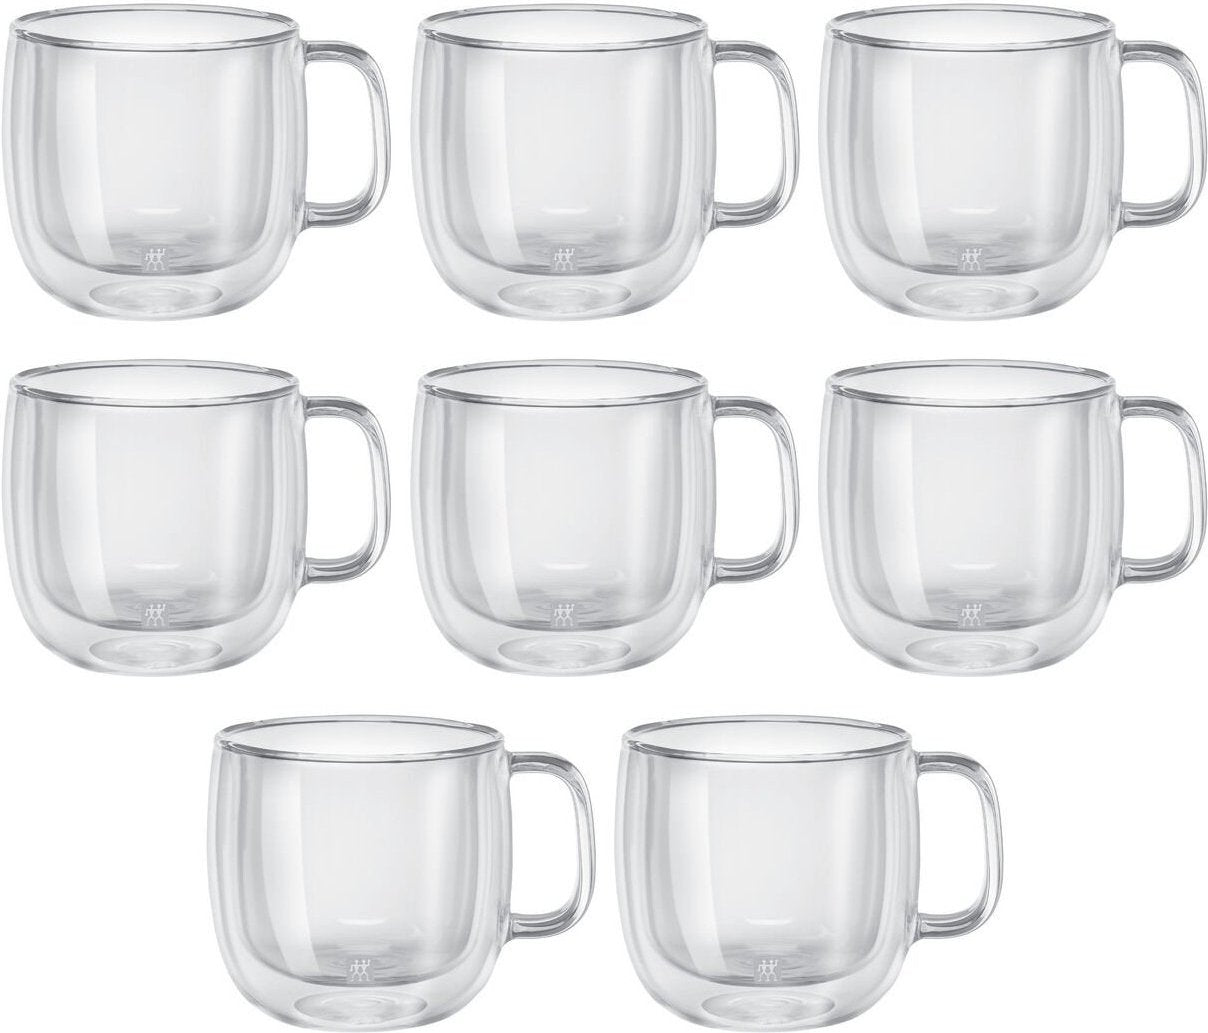 Zwilling - 8 PC Sorrento Double-Wall Cappuccino Glass Set 450mL - 39500-194